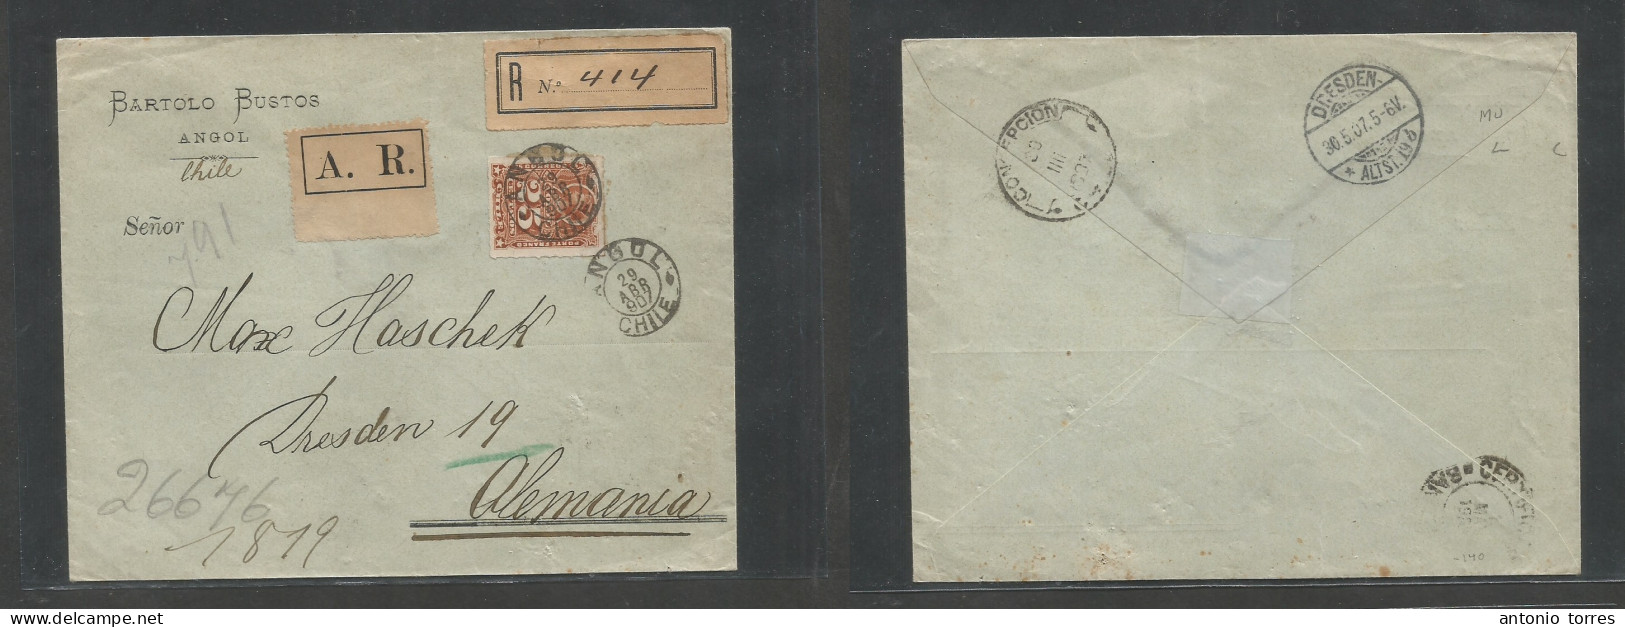 Chile - Xx. 1907 (29 Apr) Angol - Germany, Dresden (30 May) Comercial Registered AR Single 25c Brown Fkd Envelope, Tied - Cile